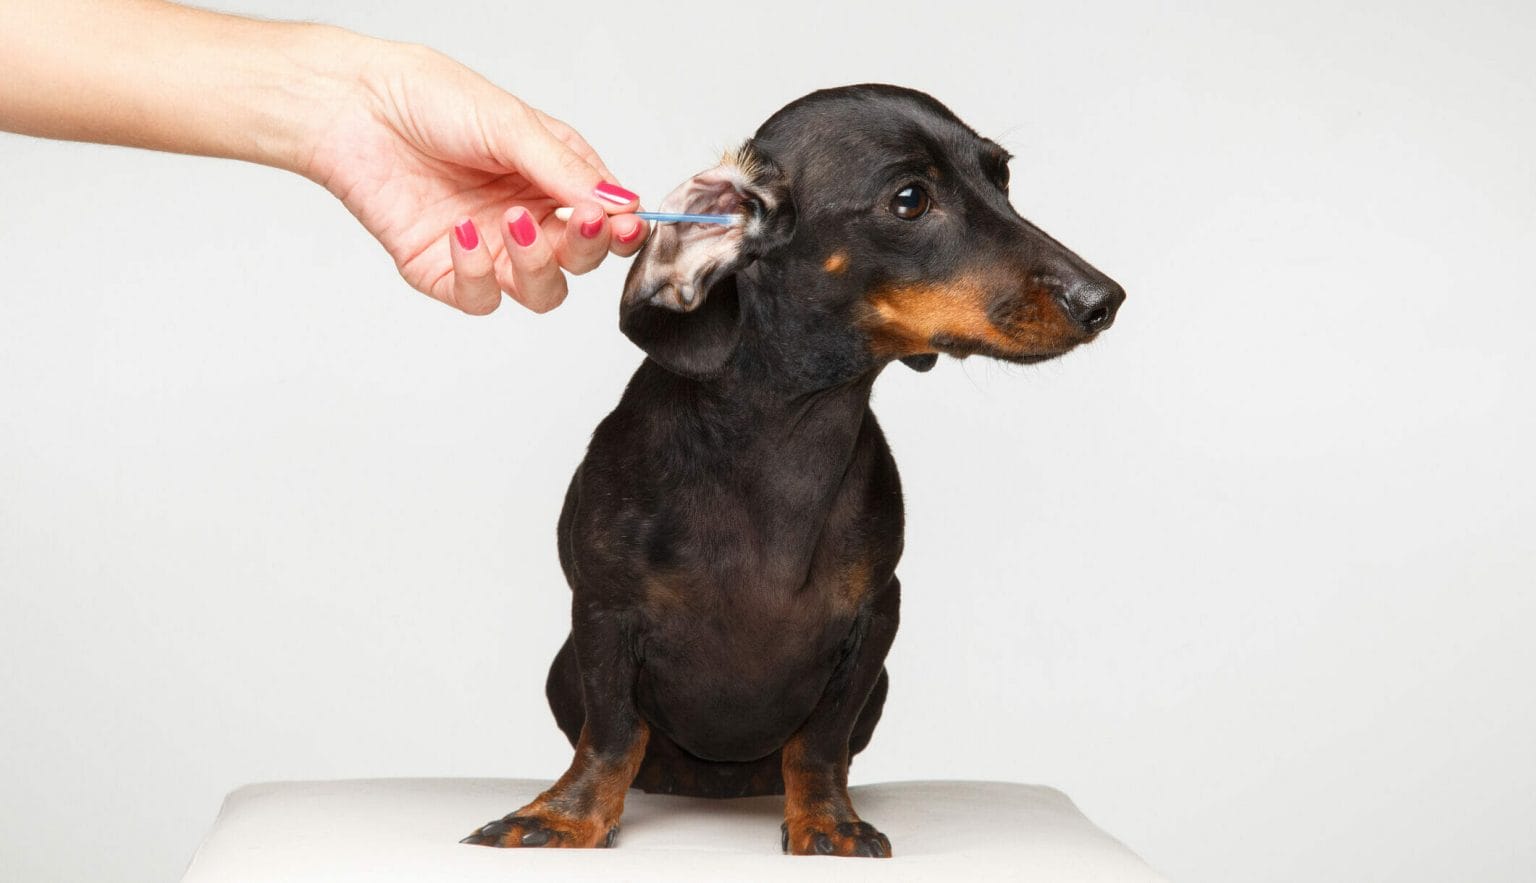 Why is it important to clean your dog's ears after swimming?